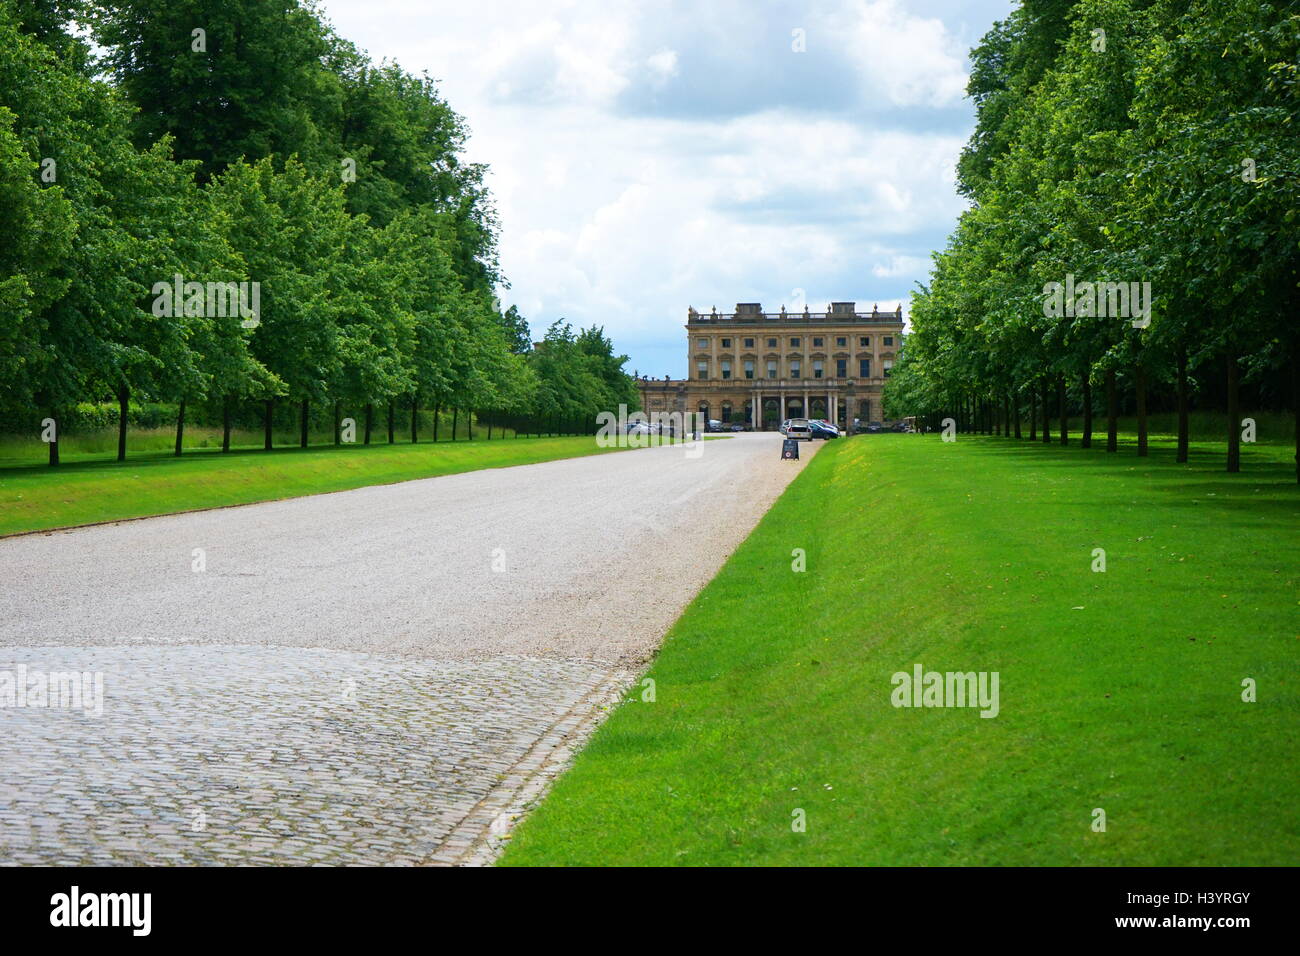 Cliveden, an Italianate mansion and estate at Taplow, Buckinghamshire, England. As home of Nancy Astor, the house was the meeting place of the Cliveden set of the 1920s and 1930s — a group of political intellectuals. Later, during the 1960s, it became the setting for key events of the notorious Profumo Affair (a scandal that led to the collapse of the Conservative government in 1964) Stock Photo